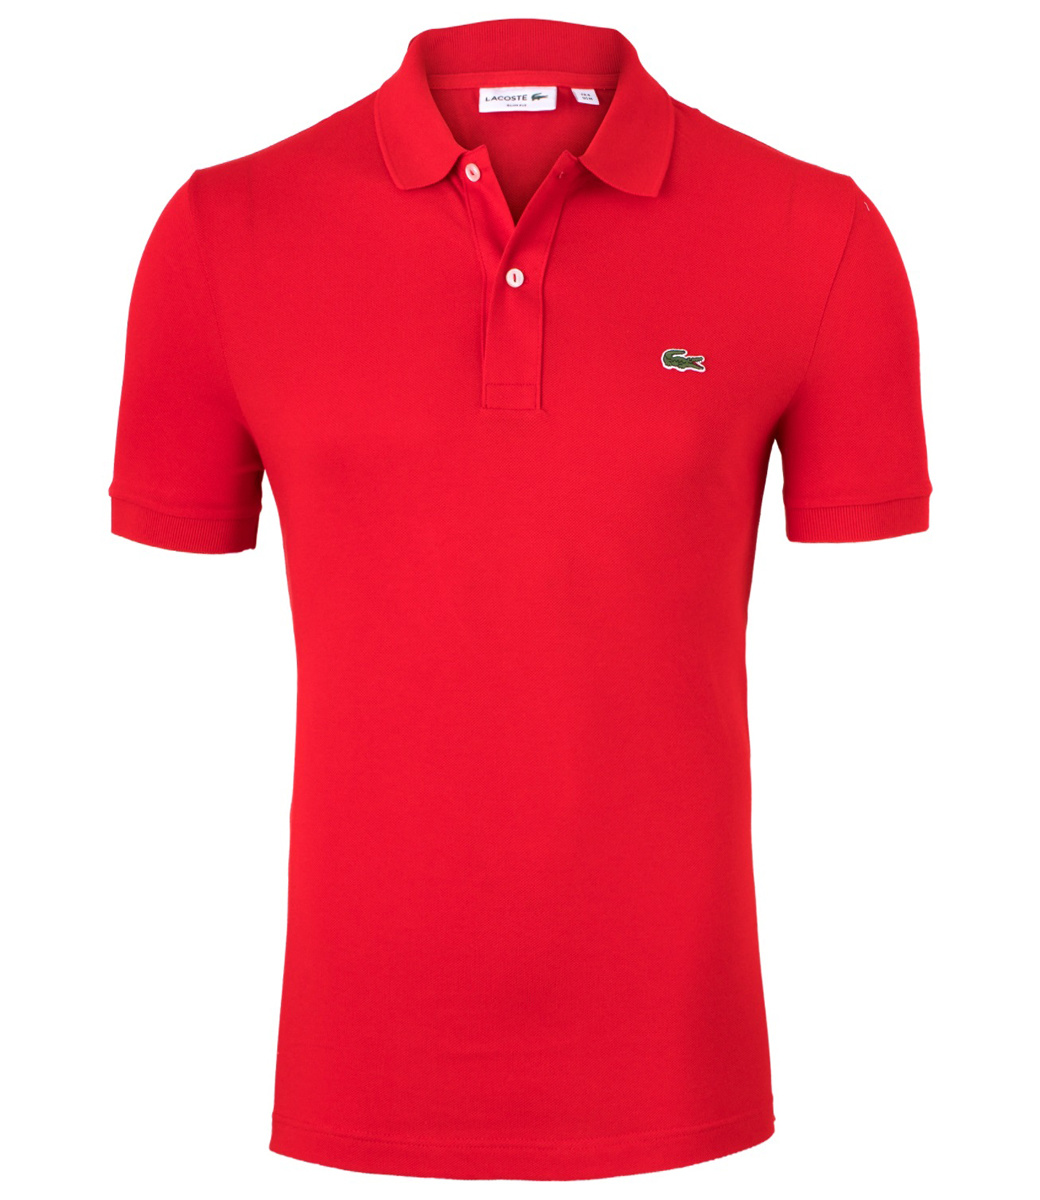 Voorloper Madeliefje Regeneratief Lacoste slim fit rood polo PH4012 11 240 1HP3 Men's S S polo 240 rouge -  Shirtsupplier.nl